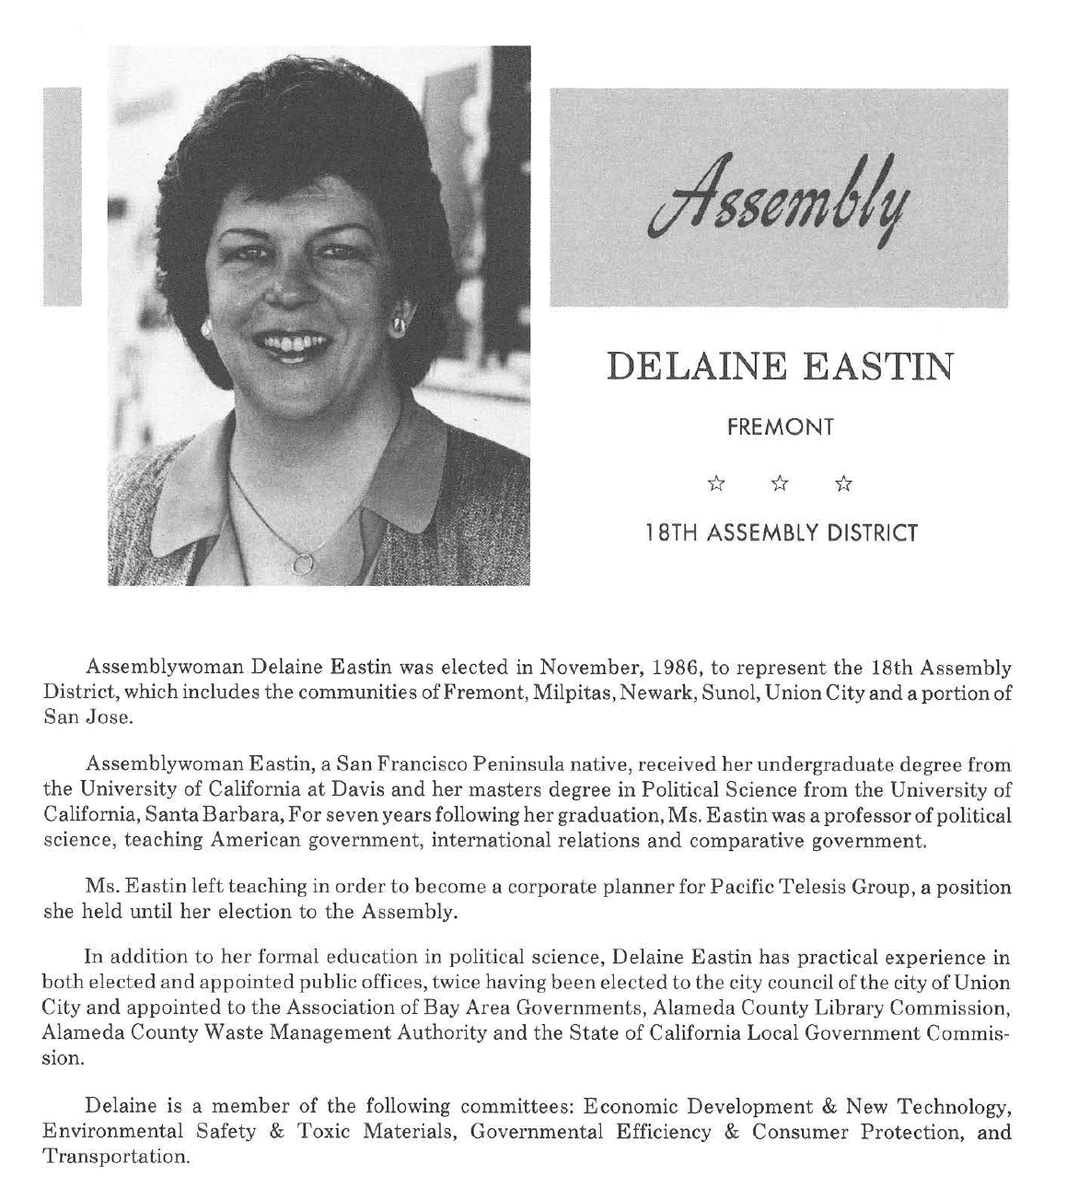 The biography for @DelaineEastin from her first term in the State Assembly.